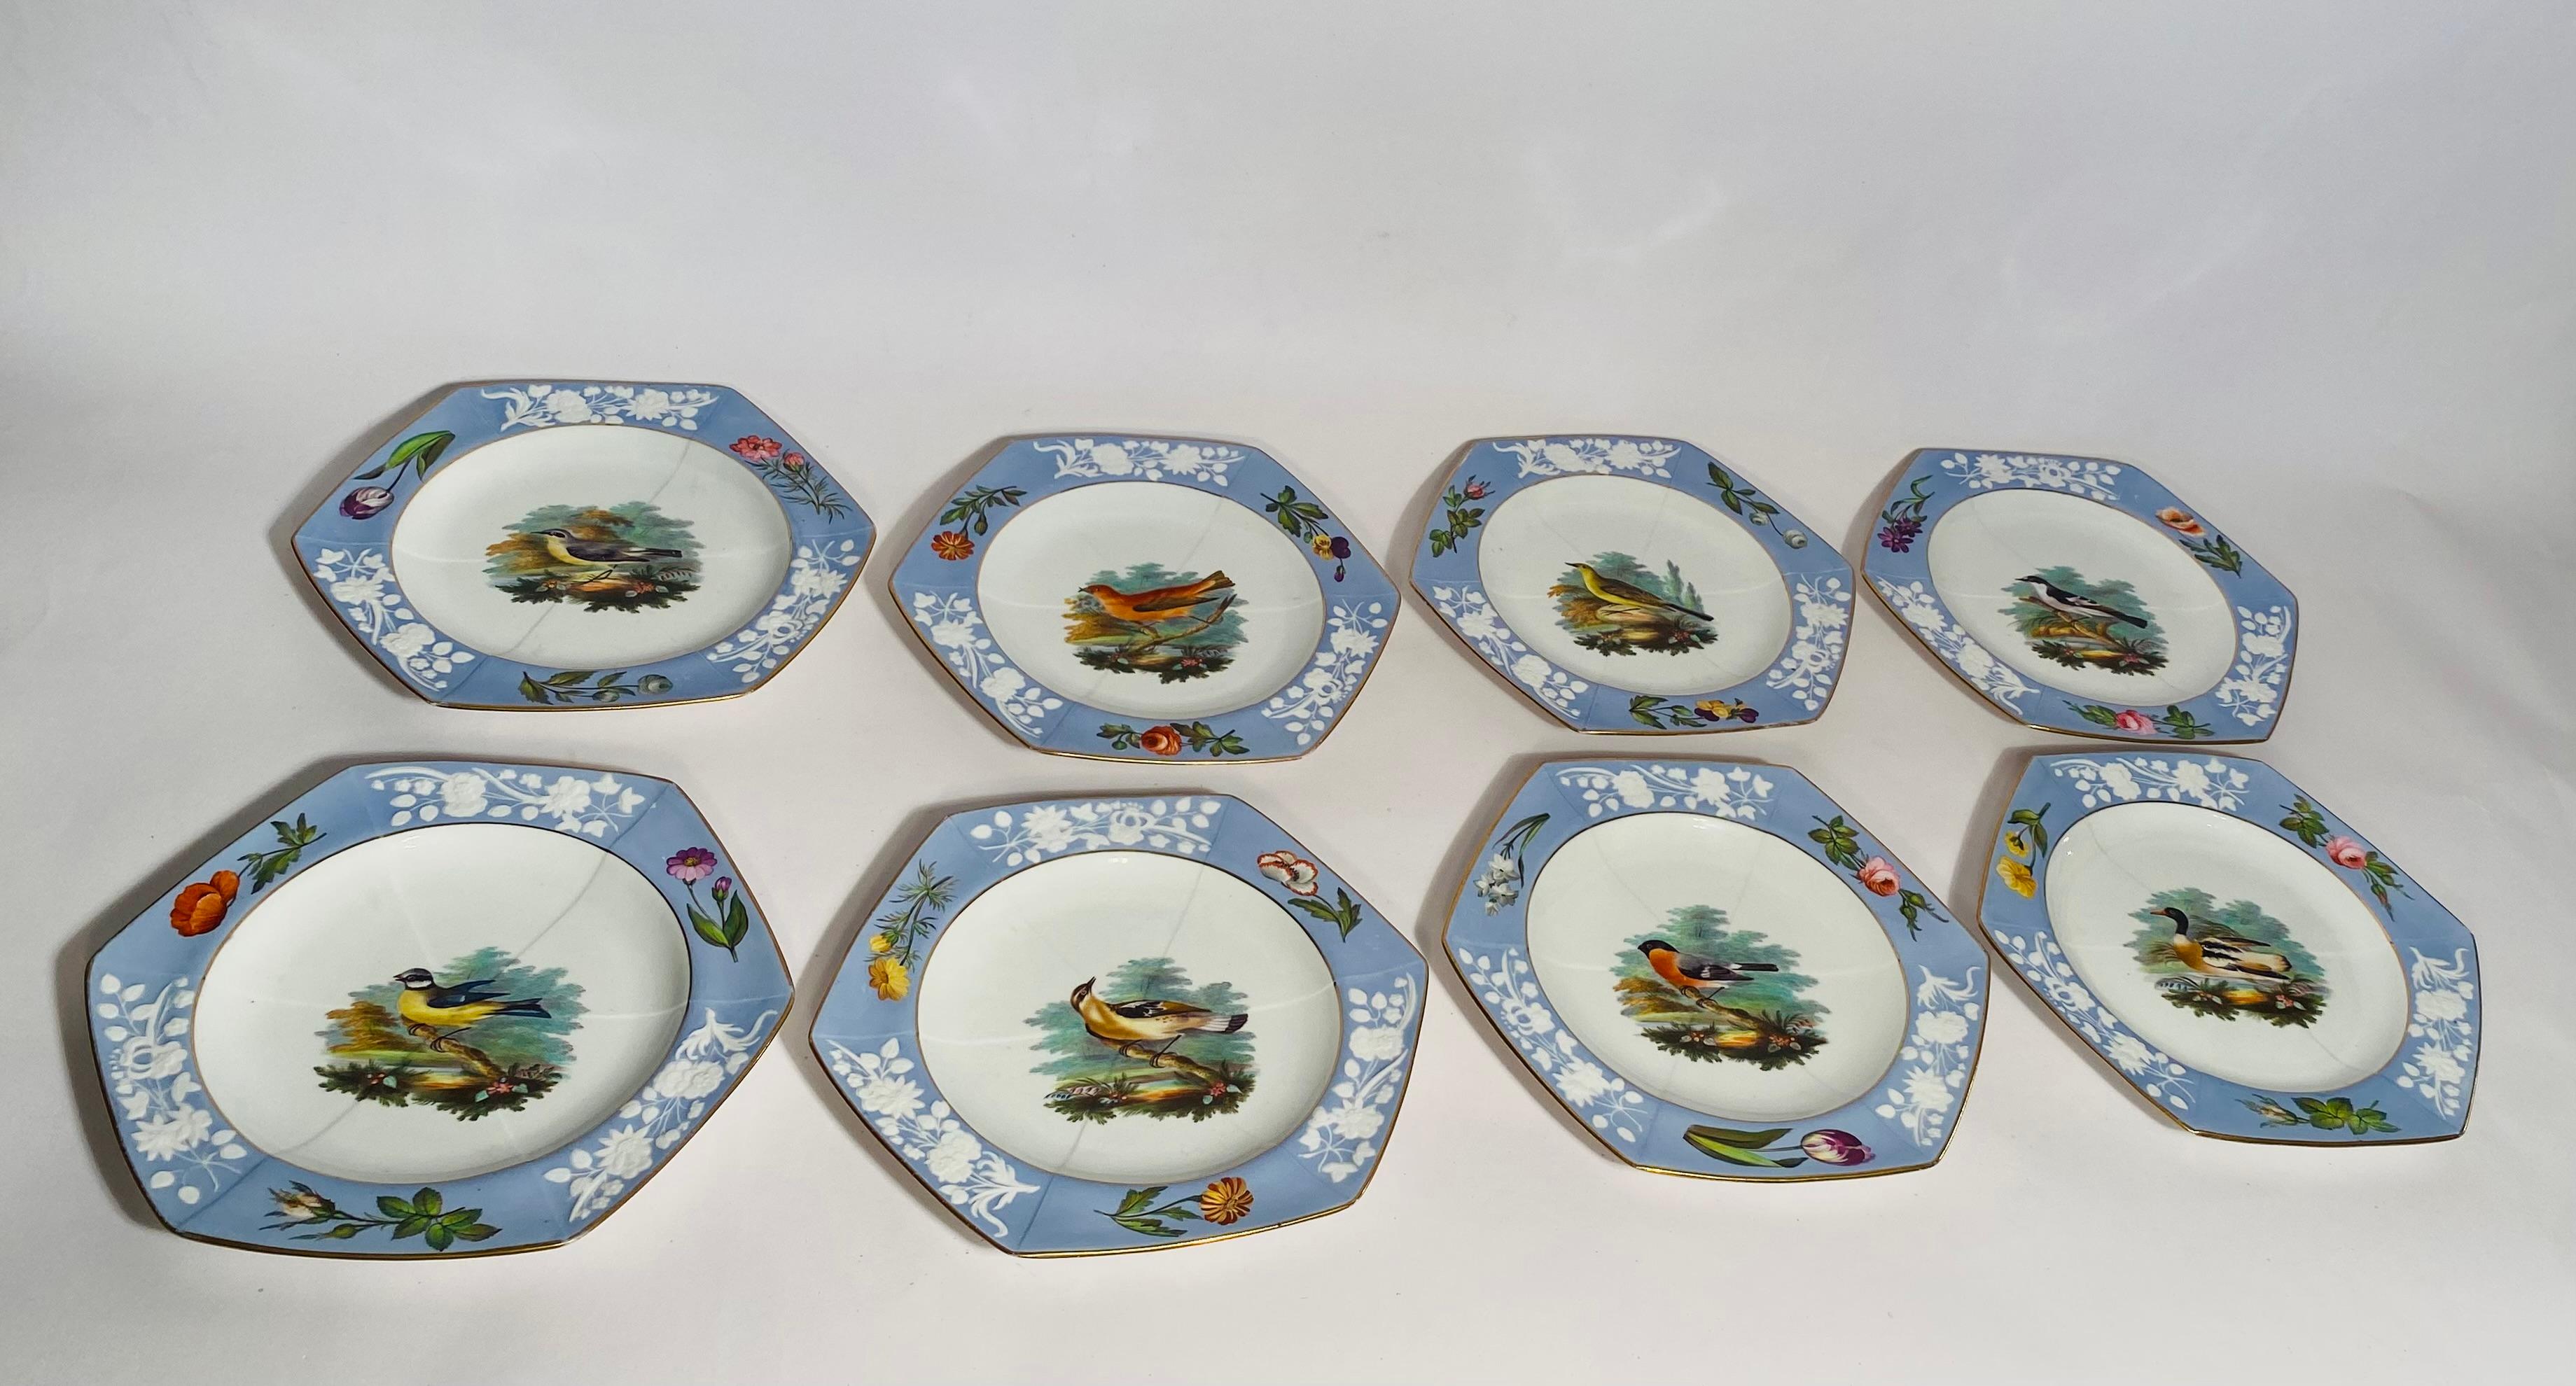 Antique English Periwinkle Blue Dessert Service for 16, Spode Circa 1820  For Sale 4